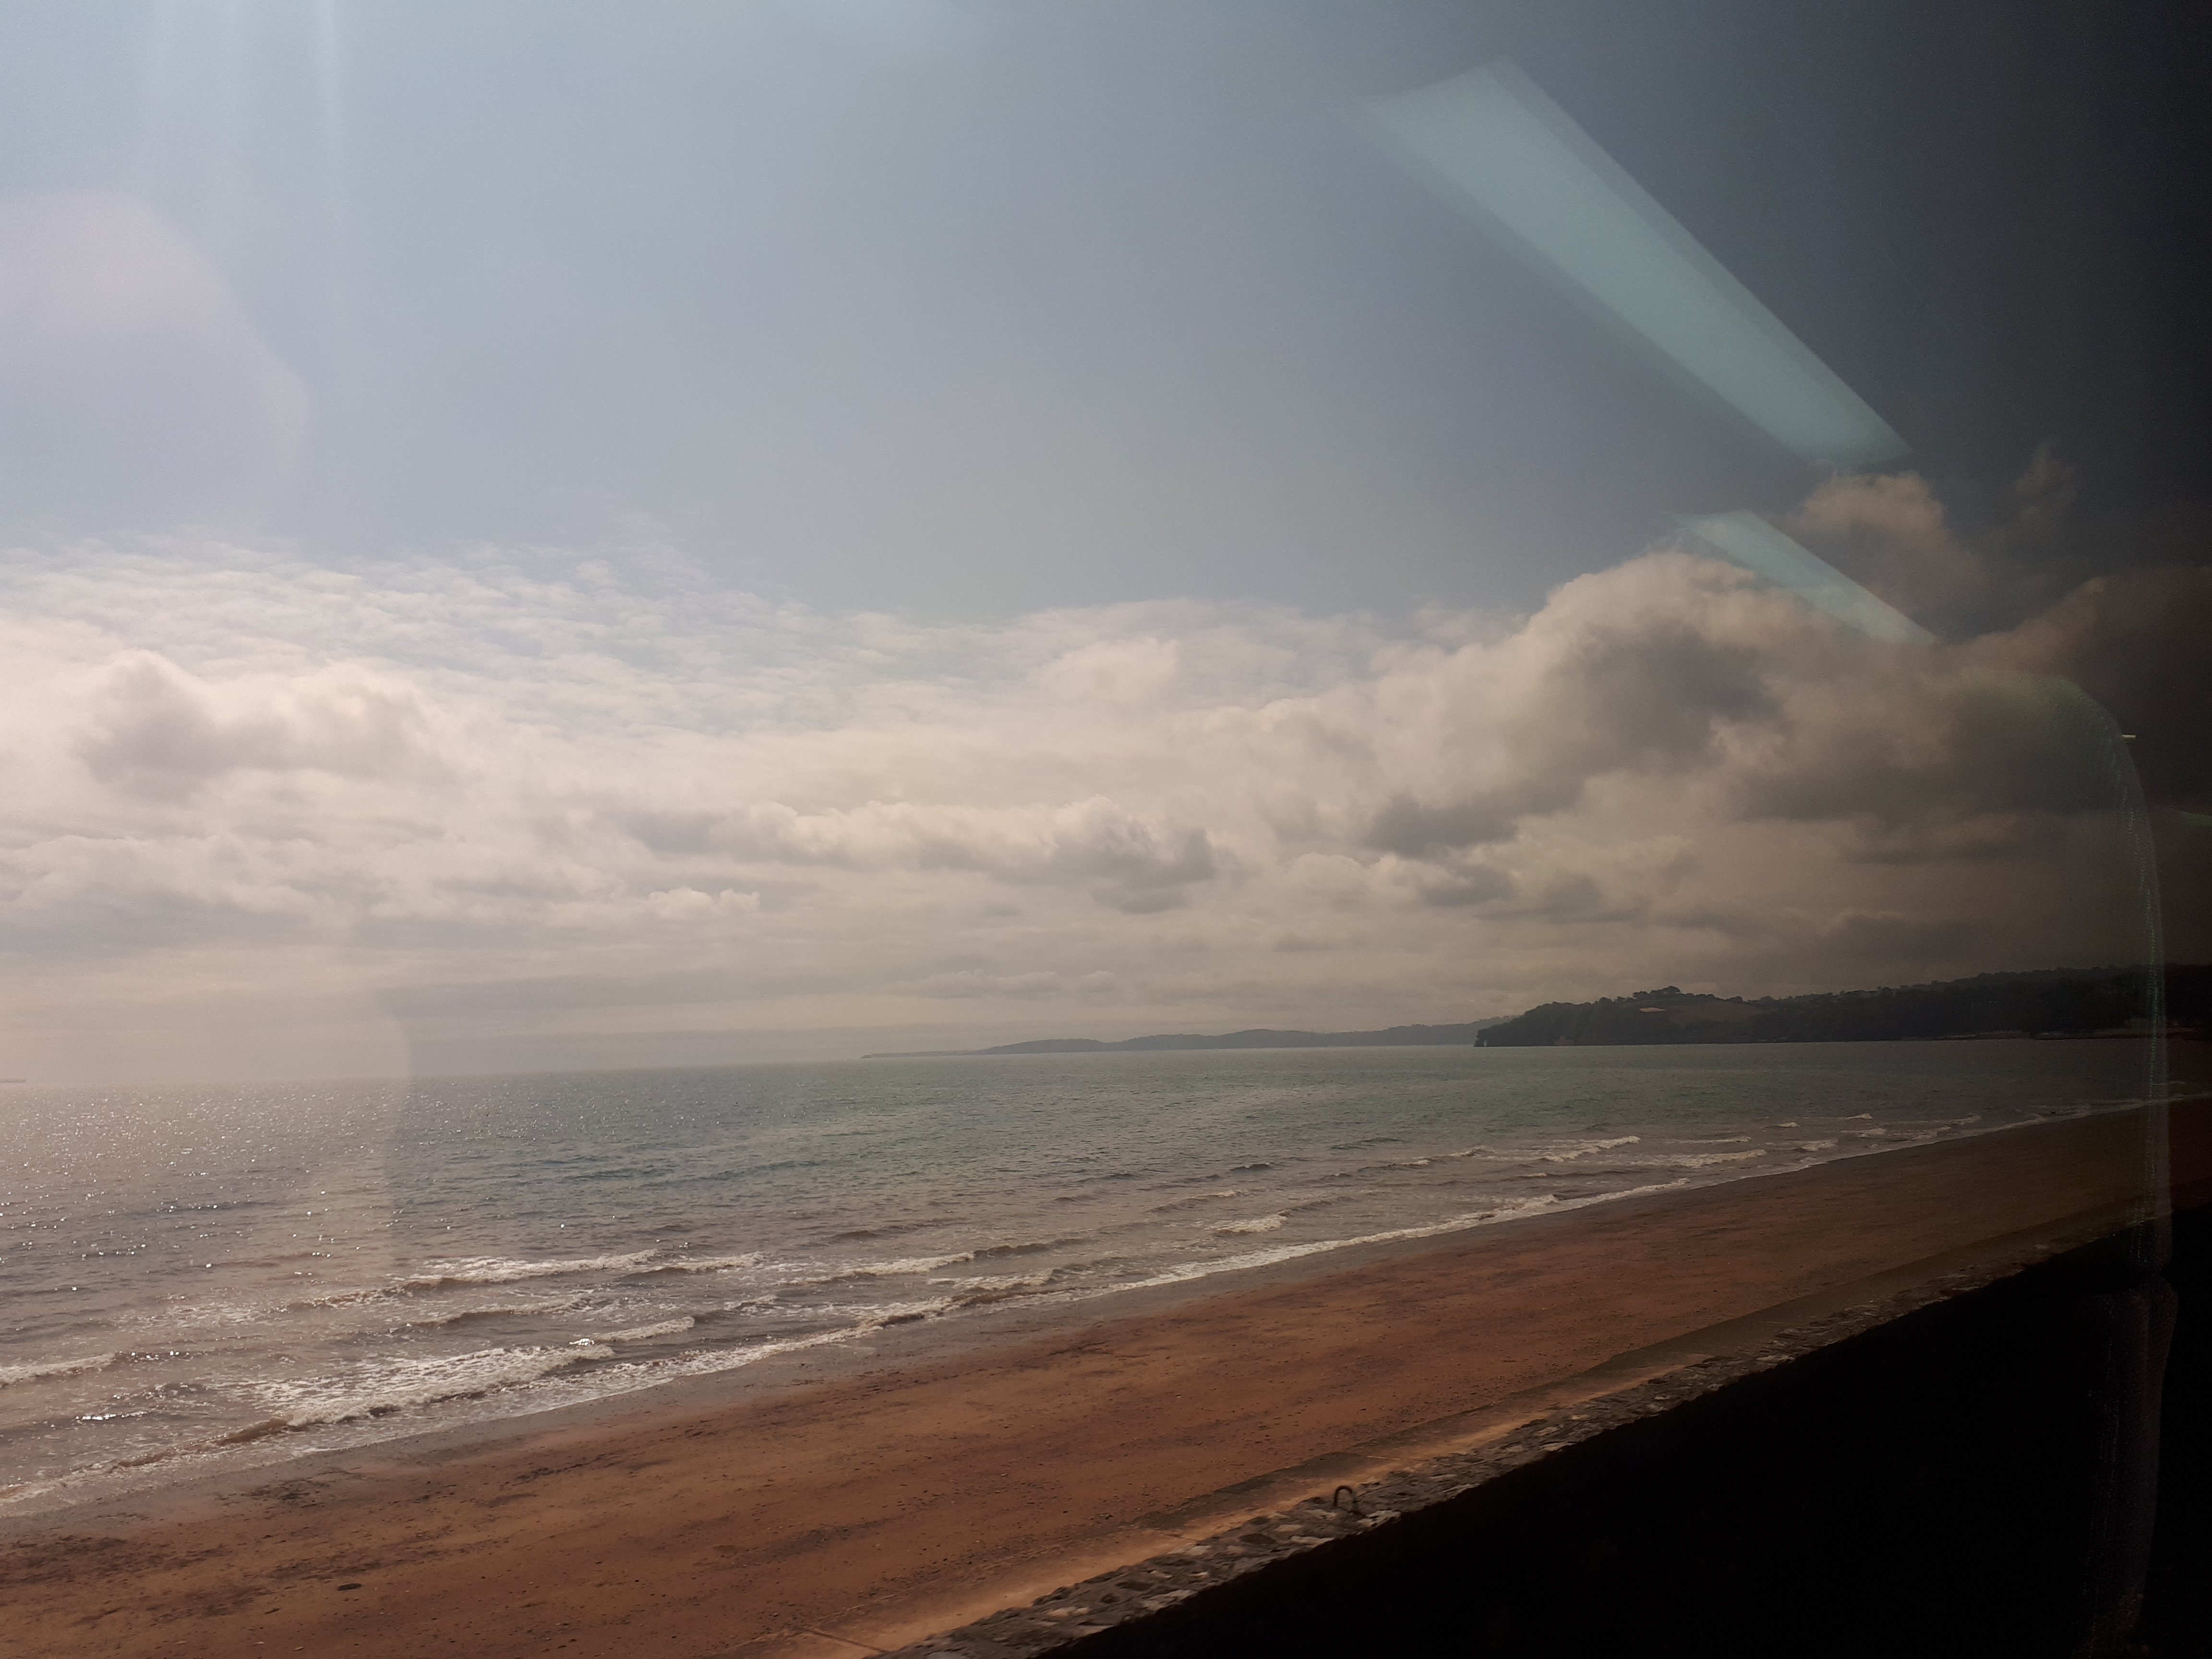 A fine view coming into Teignmouth.